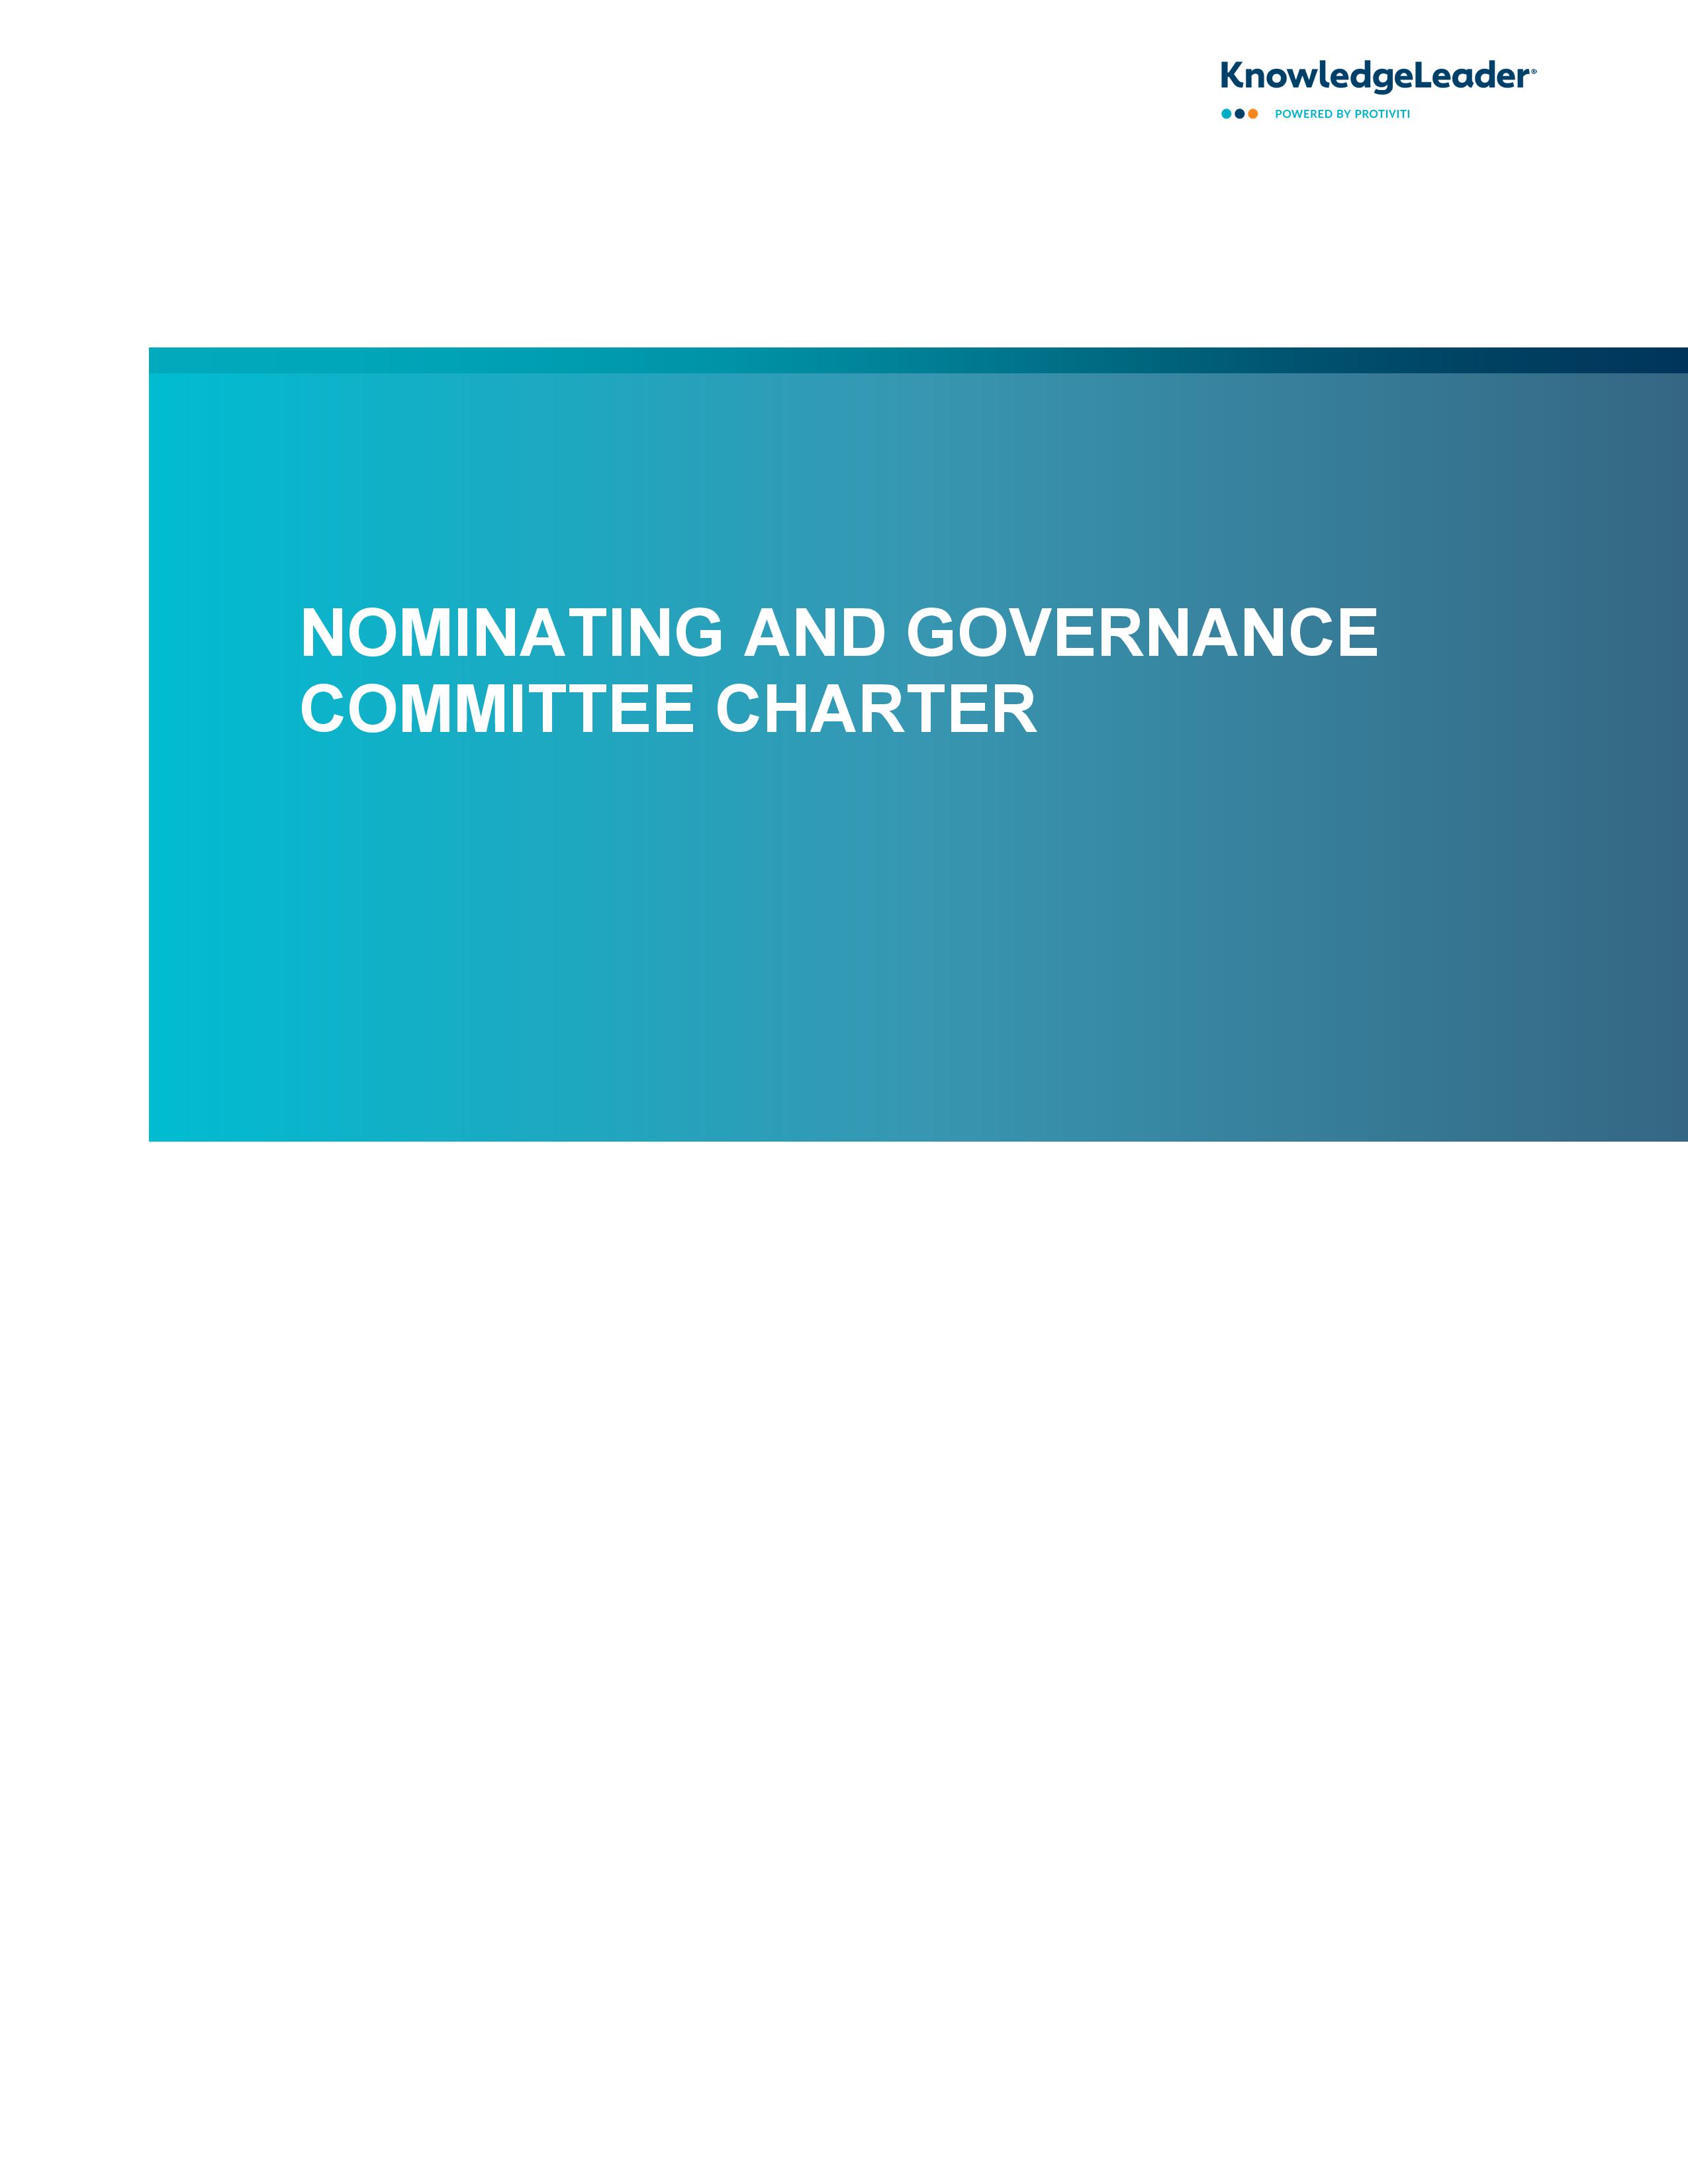 Screenshot of the first page of Nominating and Governance Committee Charter